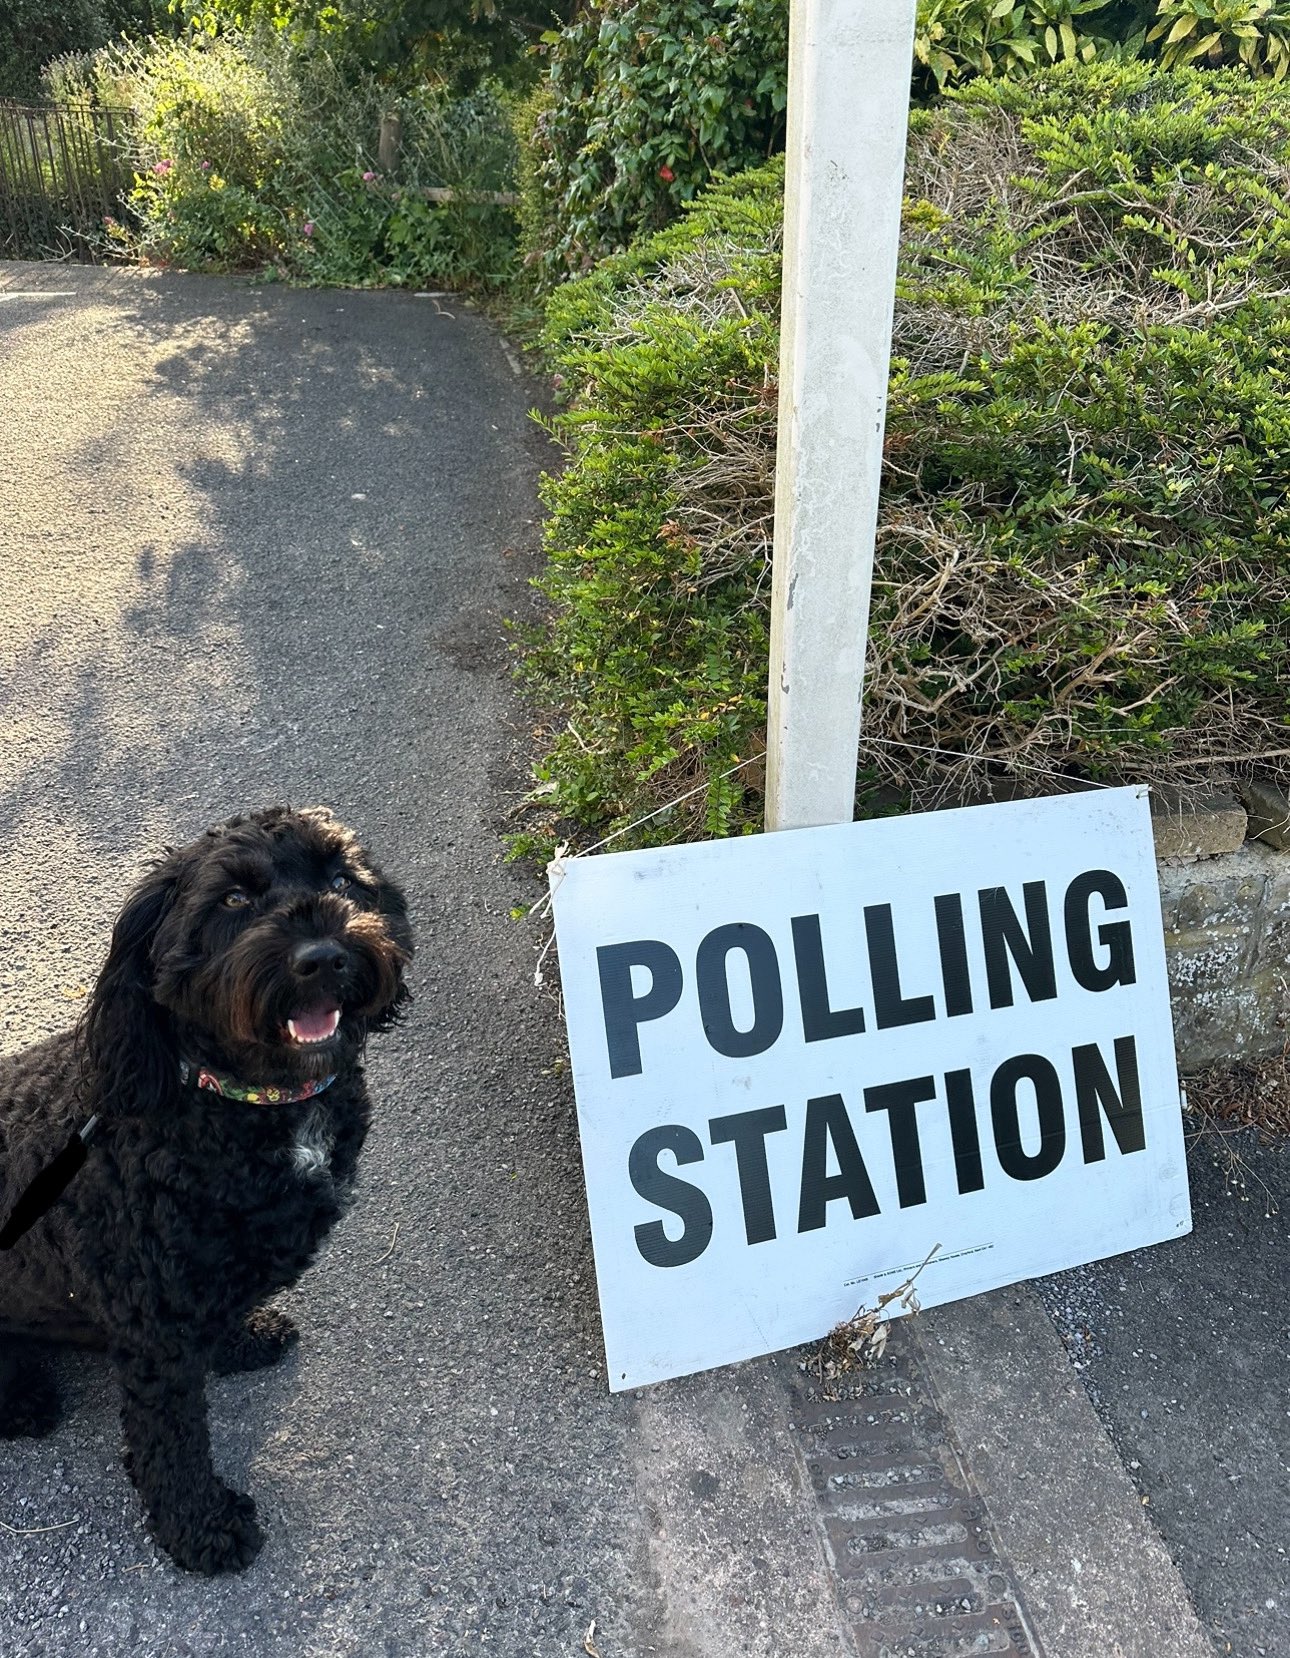 A dog sitting next to a polling station sign